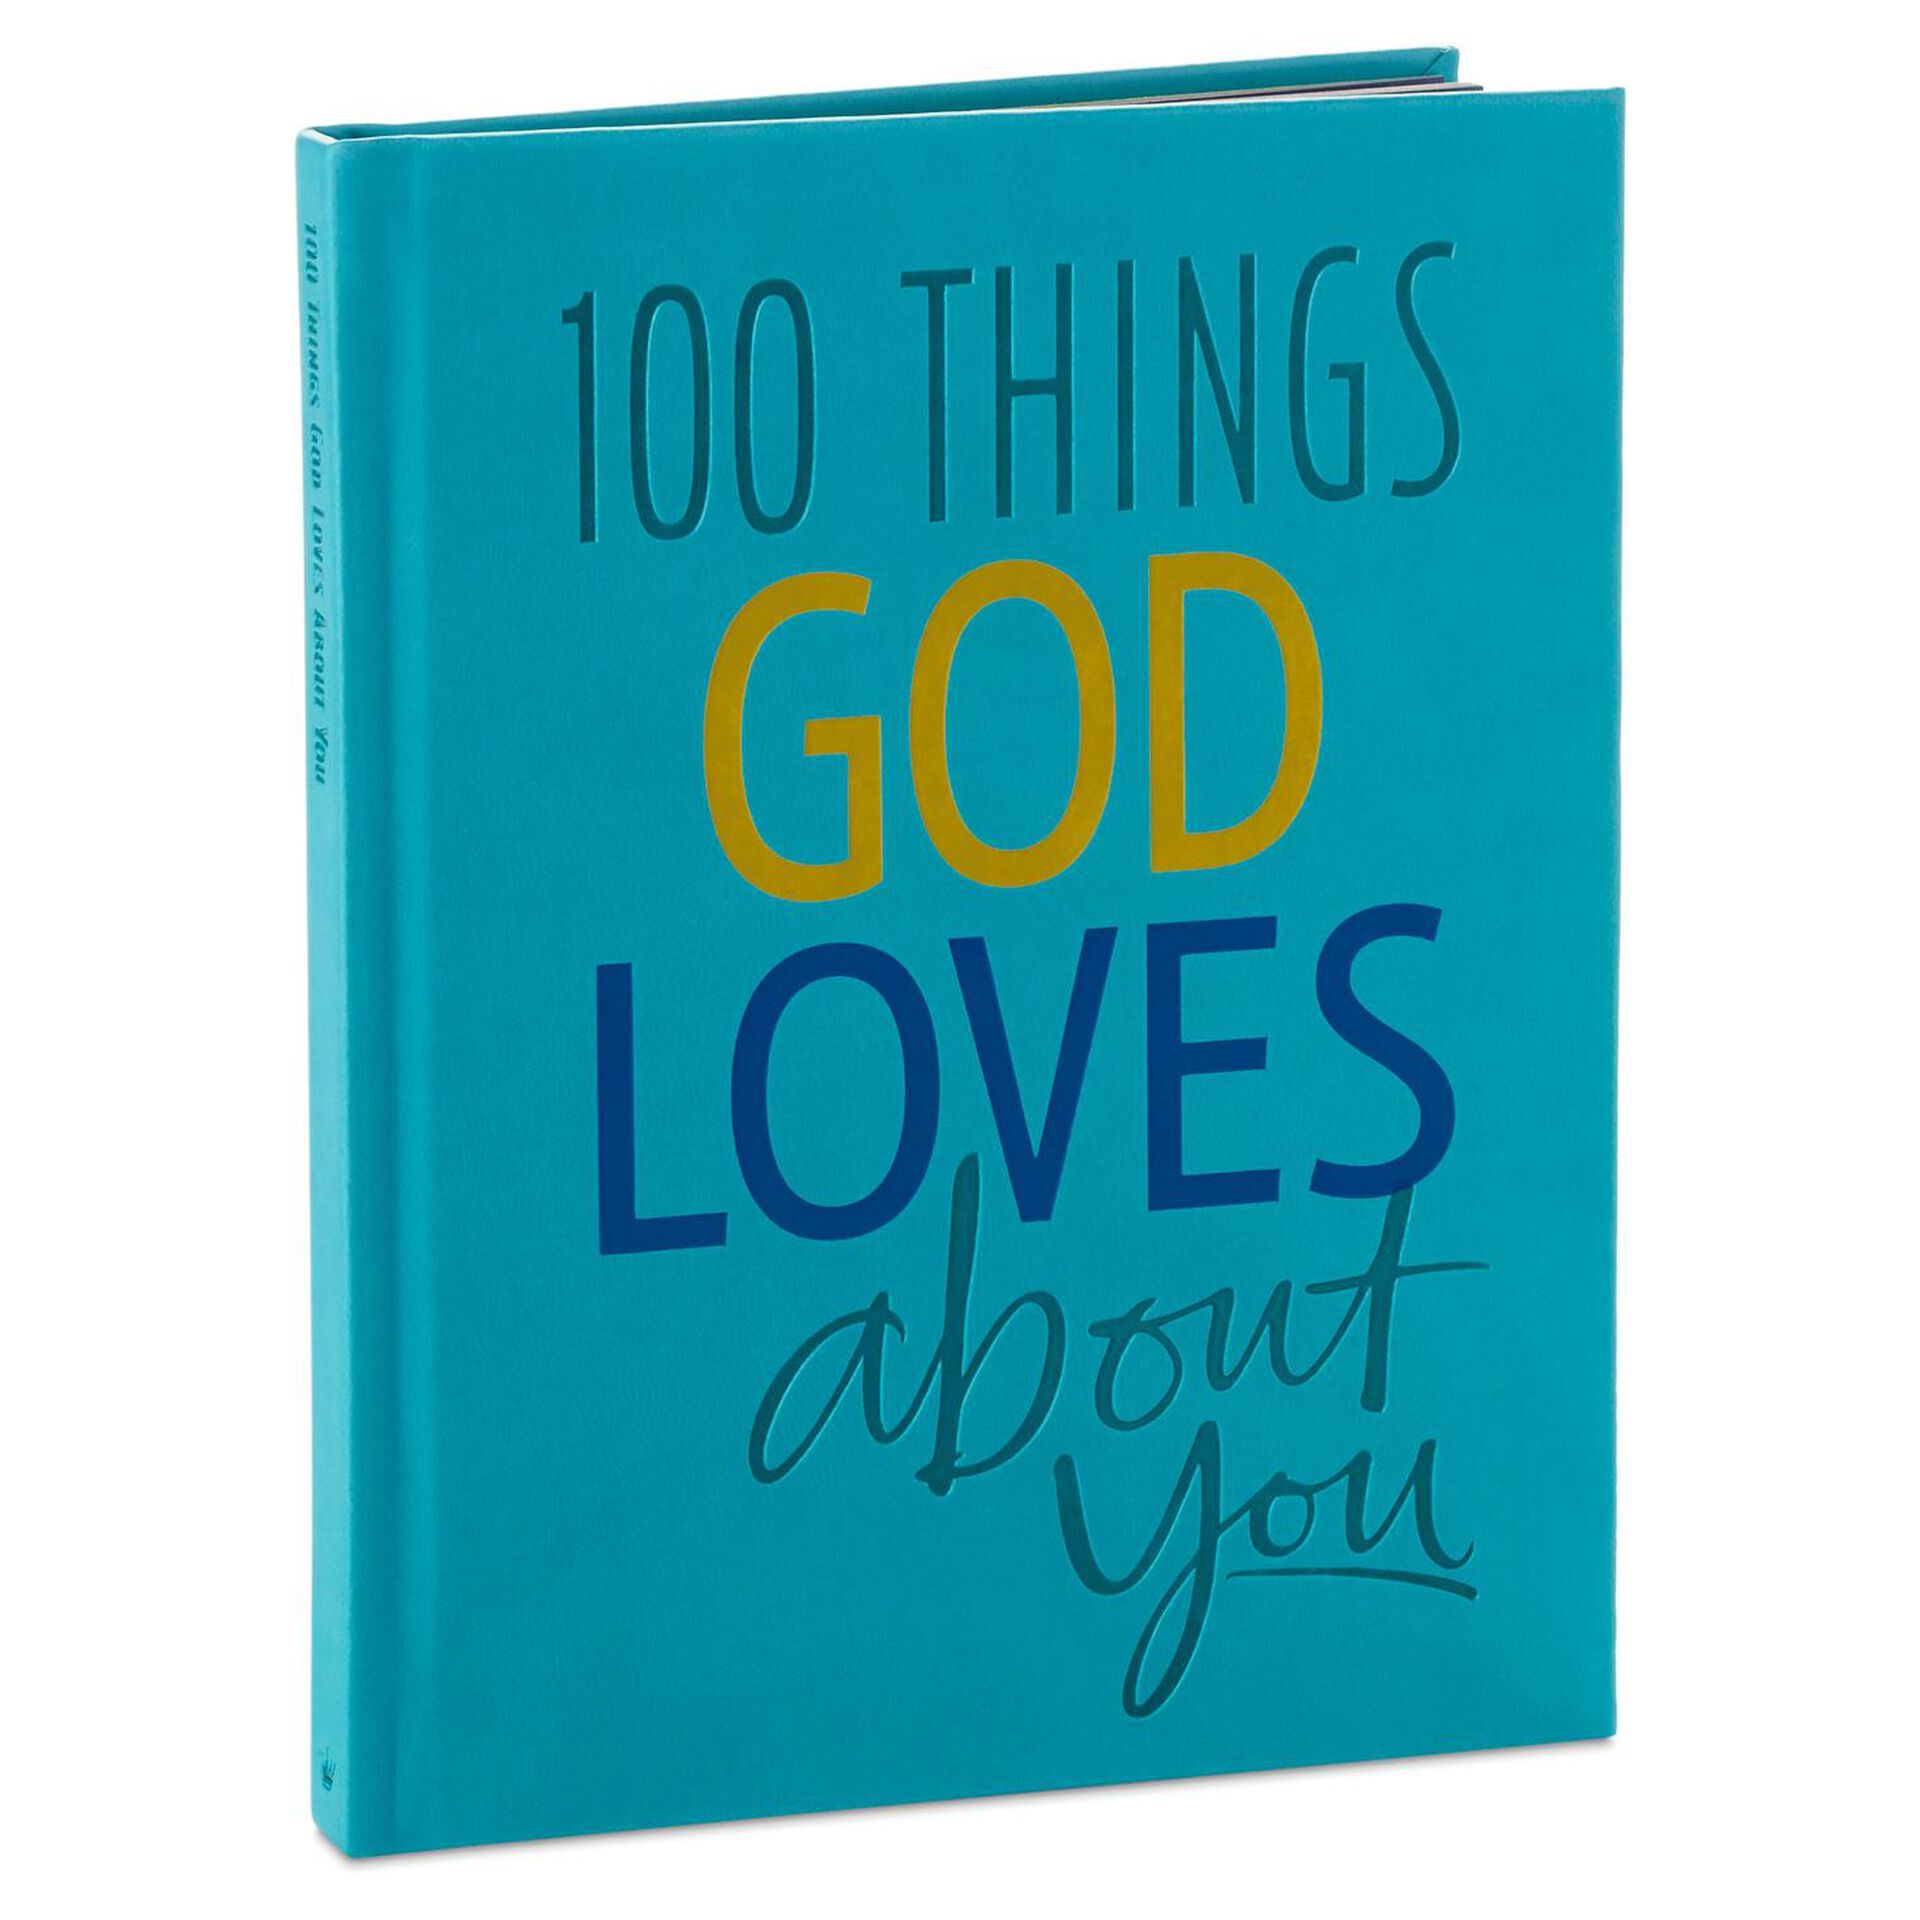 100-things-god-loves-about-you-book-root-1bok2272_1470_1-1.jpg